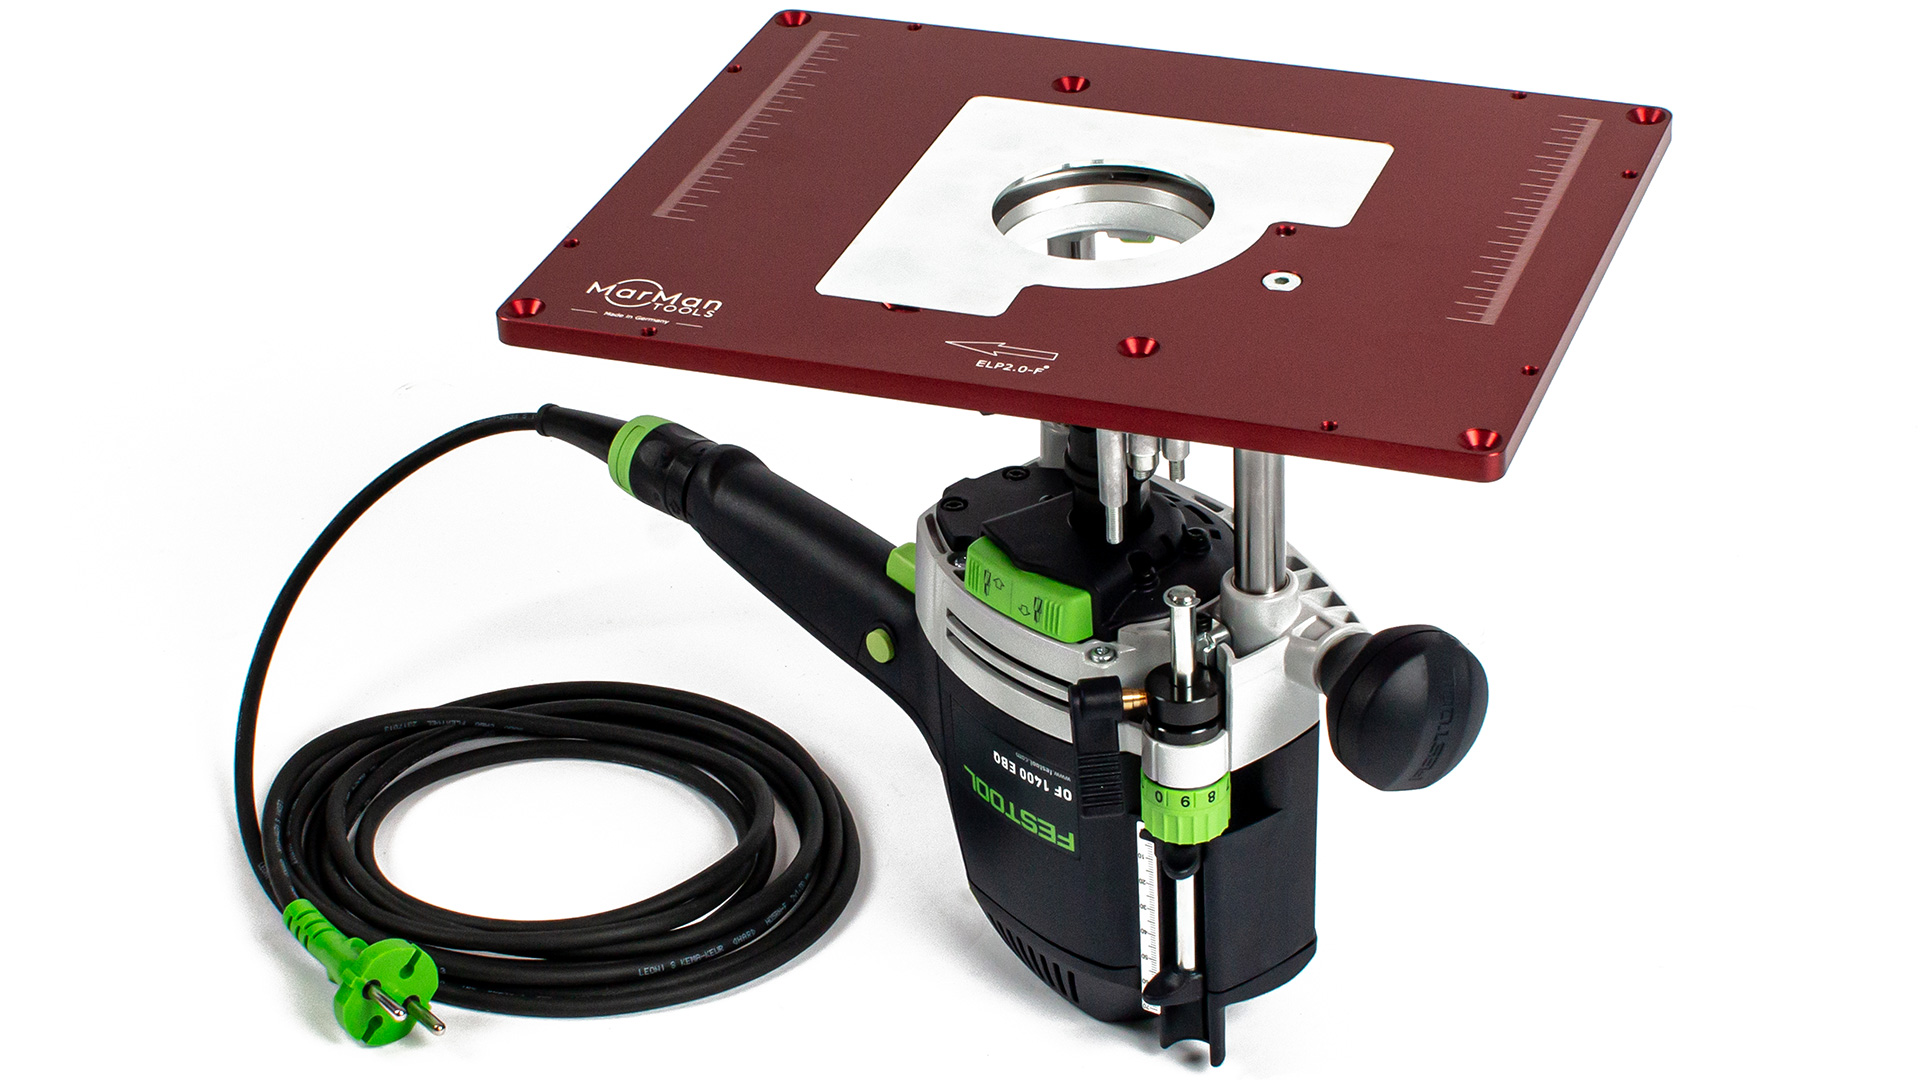 Insert Plate IP2.0-F predrilled for Festool routers